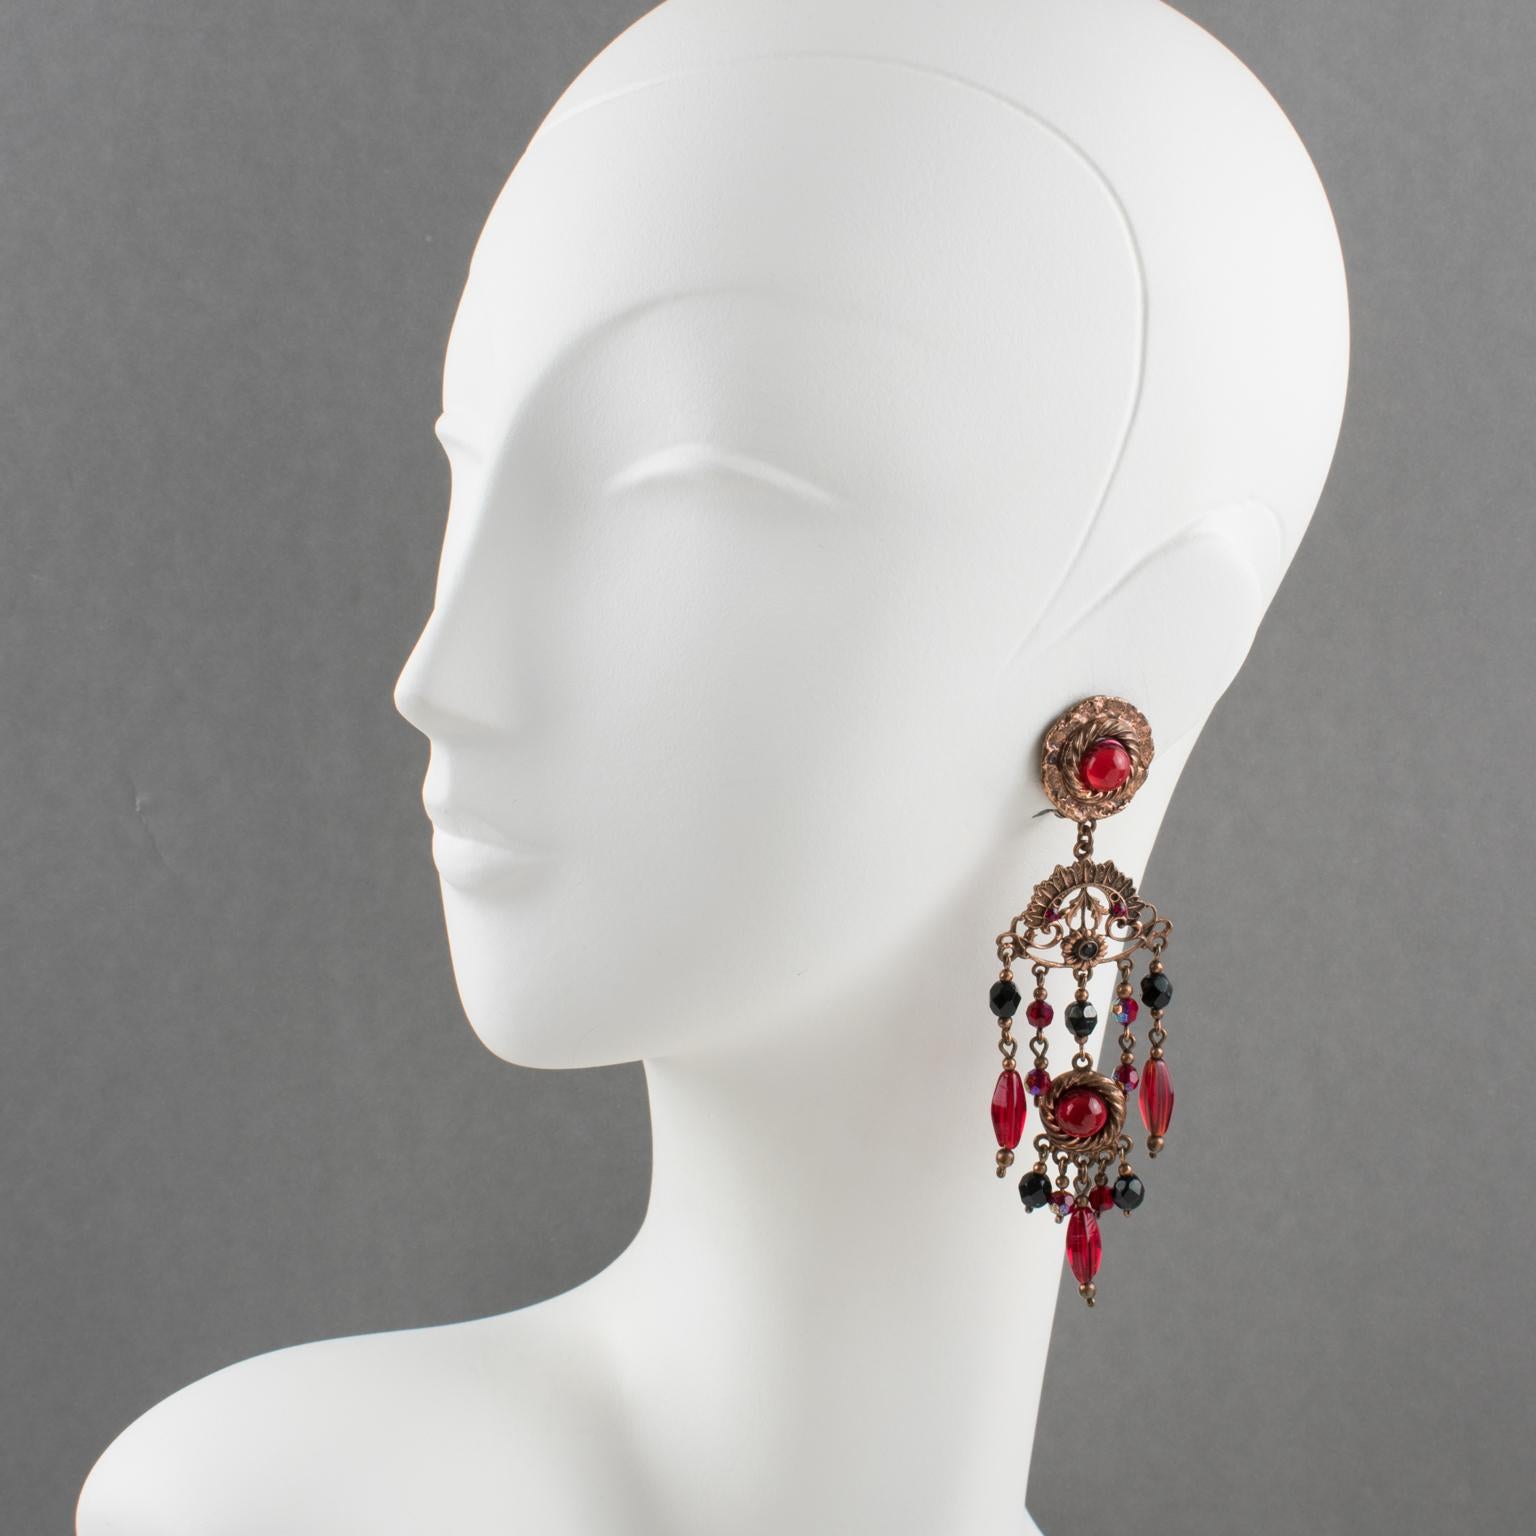 These fabulous French Jewelry designer Henry Perichon (aka Henry) baroque clip-on earrings boast a copper finish metal extra long dangling shape in a Victorian design inspiration ornate with red and black faceted crystal beads and ruby red poured